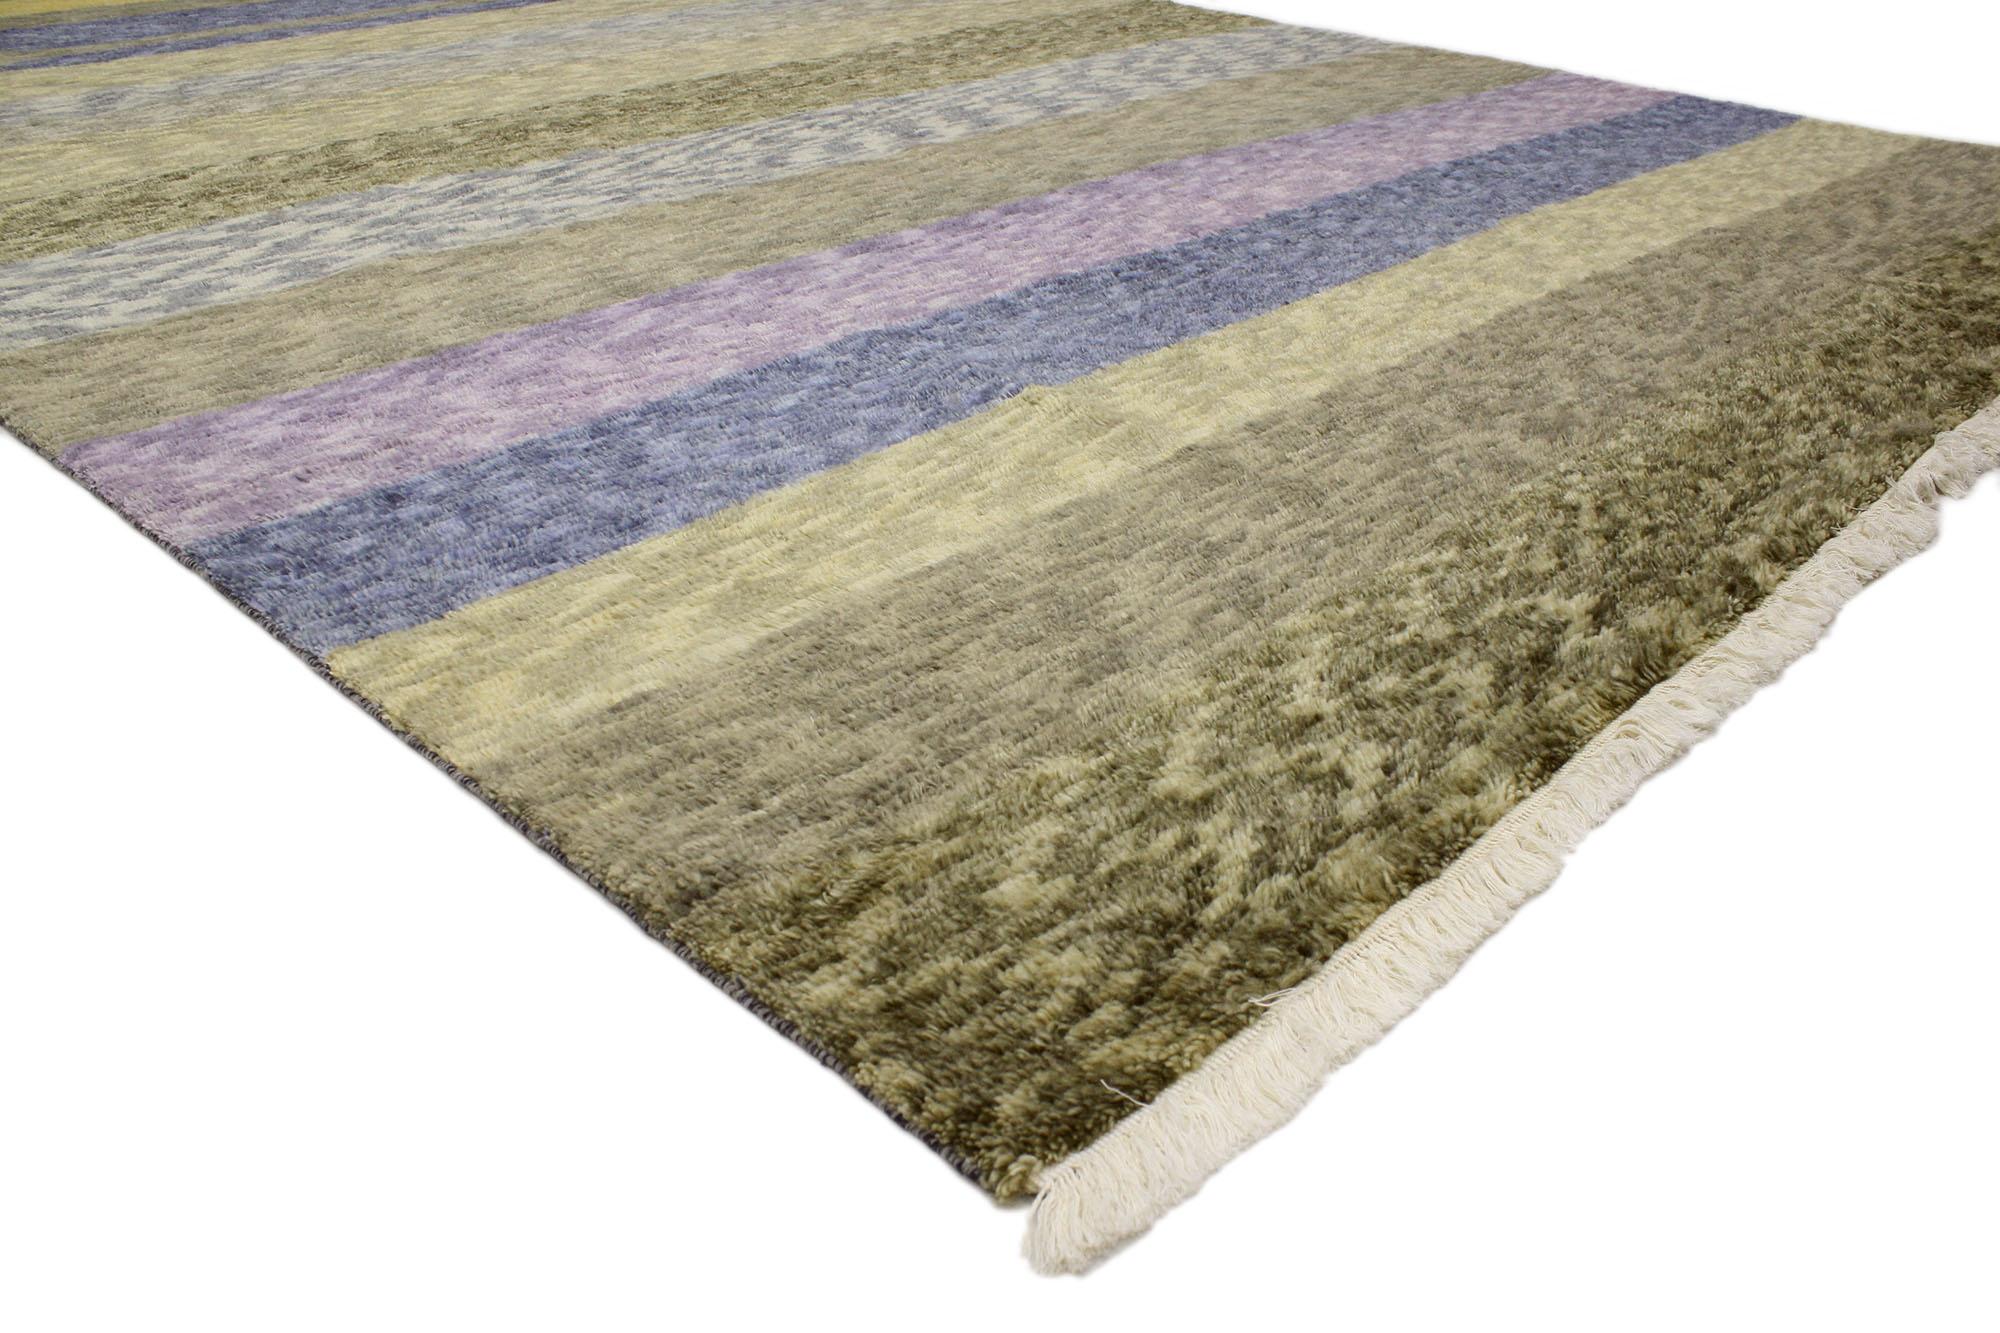 30362 Nature-Inspired Moroccan Rug, 09'00 x 13'07. 
Biophilic Design meets Abstract Expressionist style in this nature-inspired Moroccan rug. The intrinsic melange pattern and vibrant earthy colors woven into this piece work together creating a